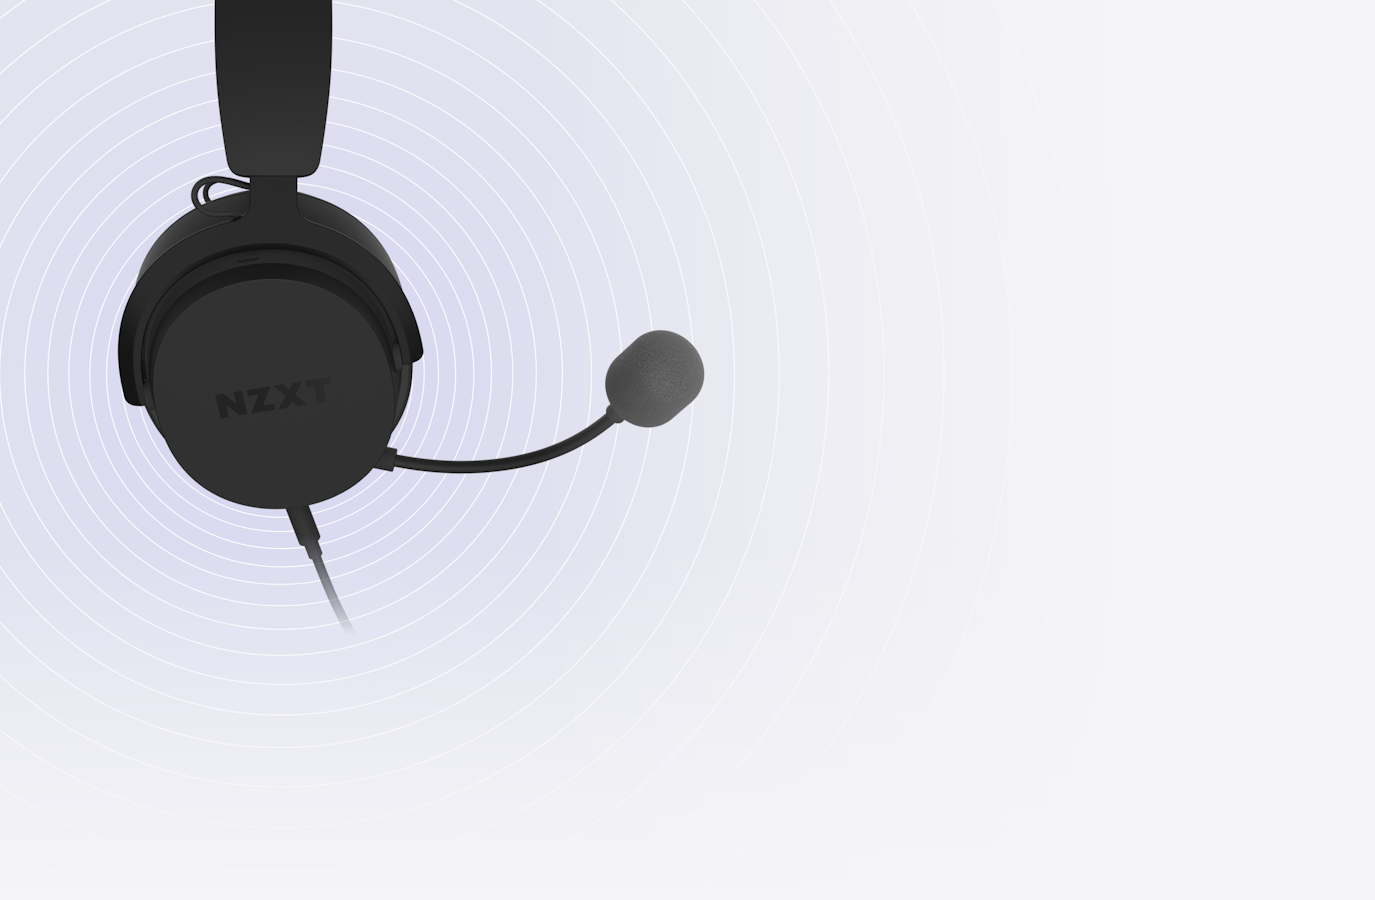 Headset Floating in Space